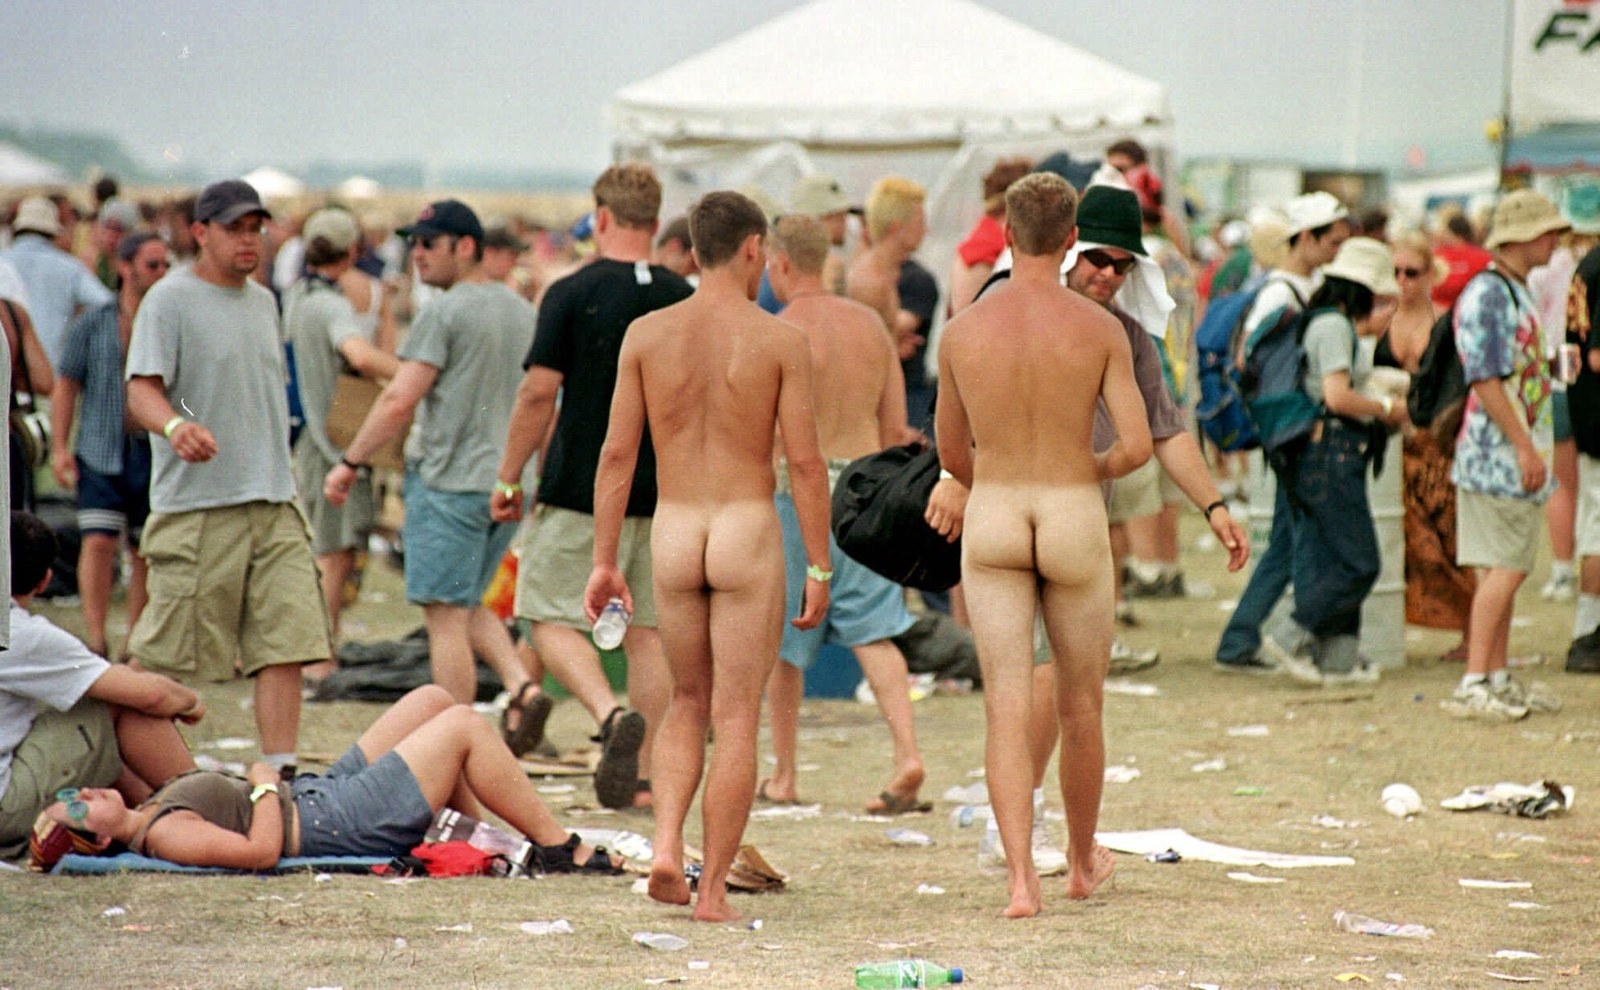 beth pawlowski recommends Woodstock 99 Topless